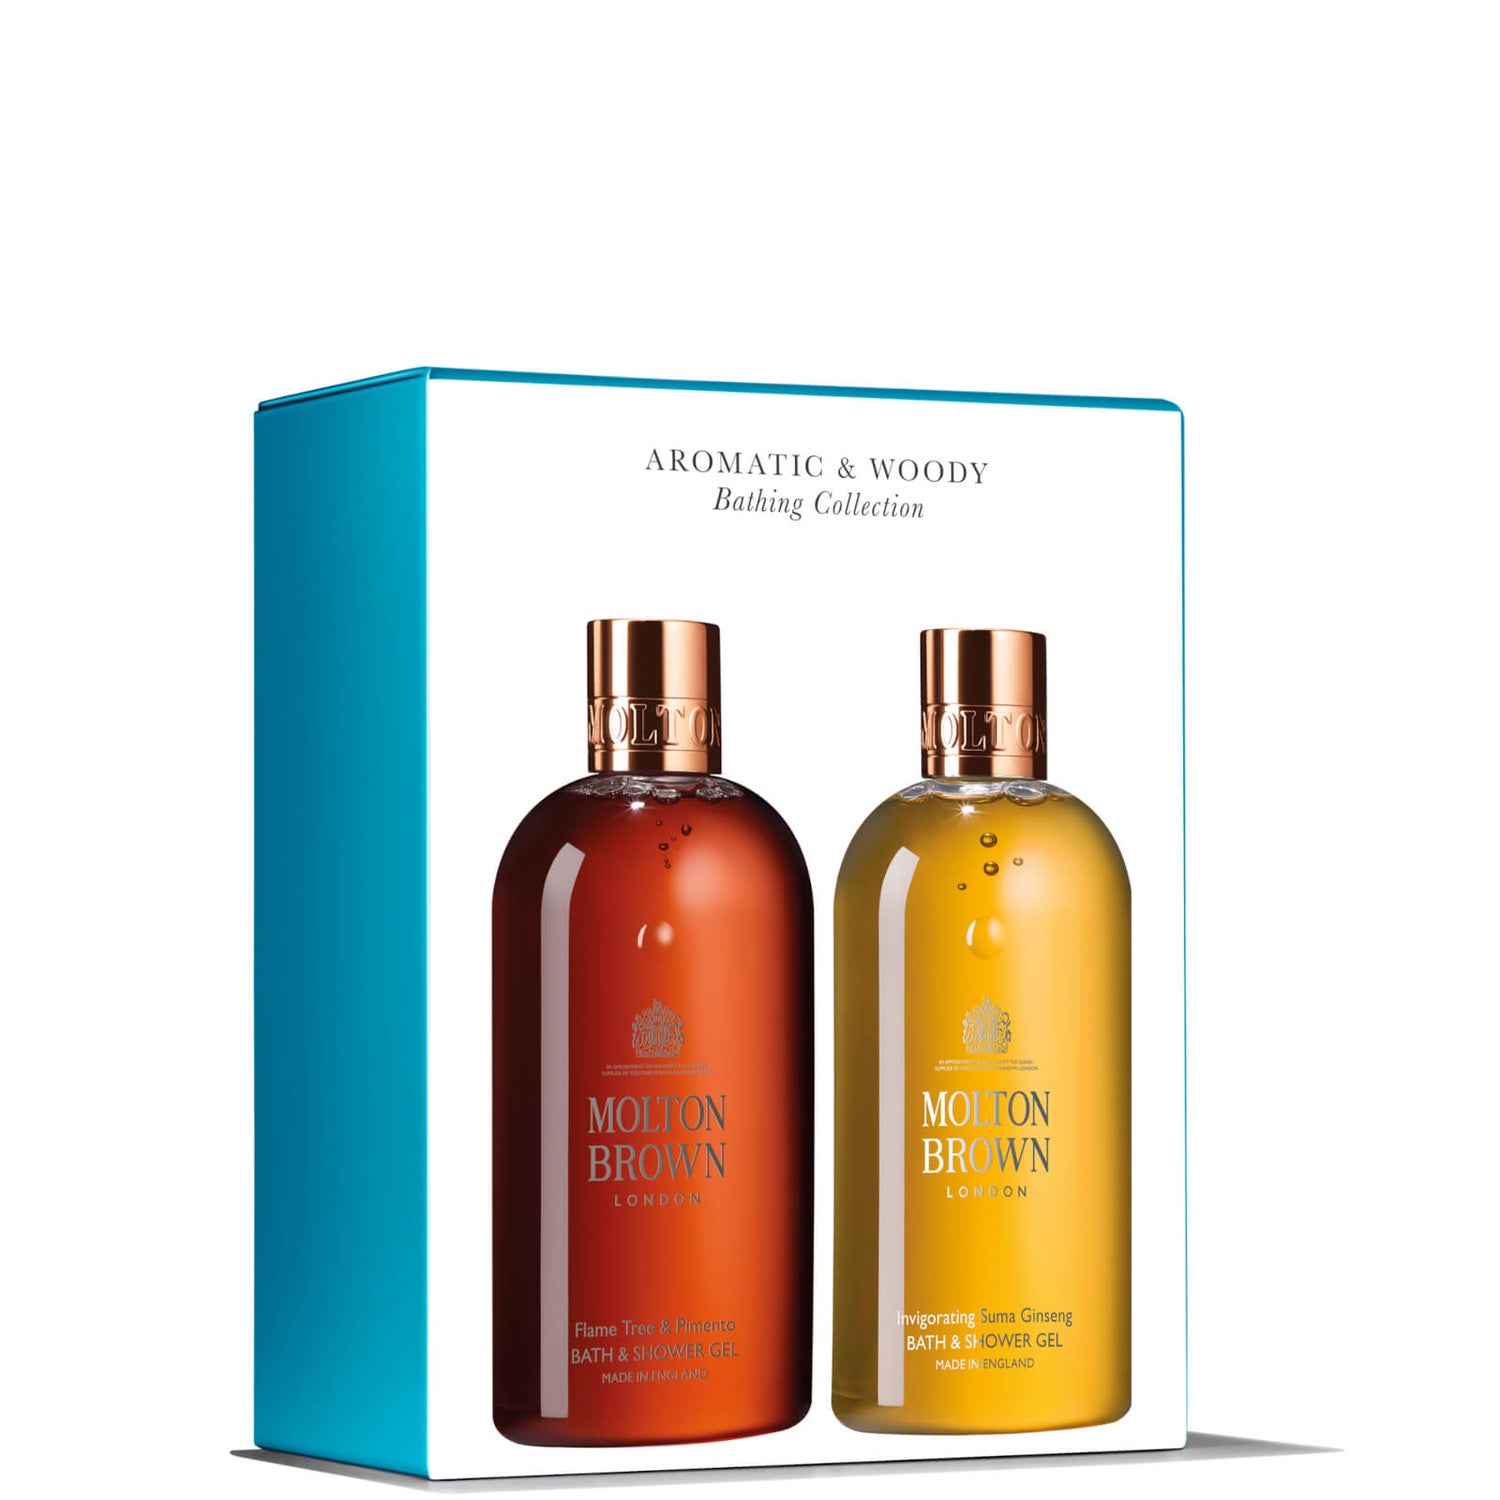 Molton Brown Aromatic and Woody Gift Set (Worth £44.00)